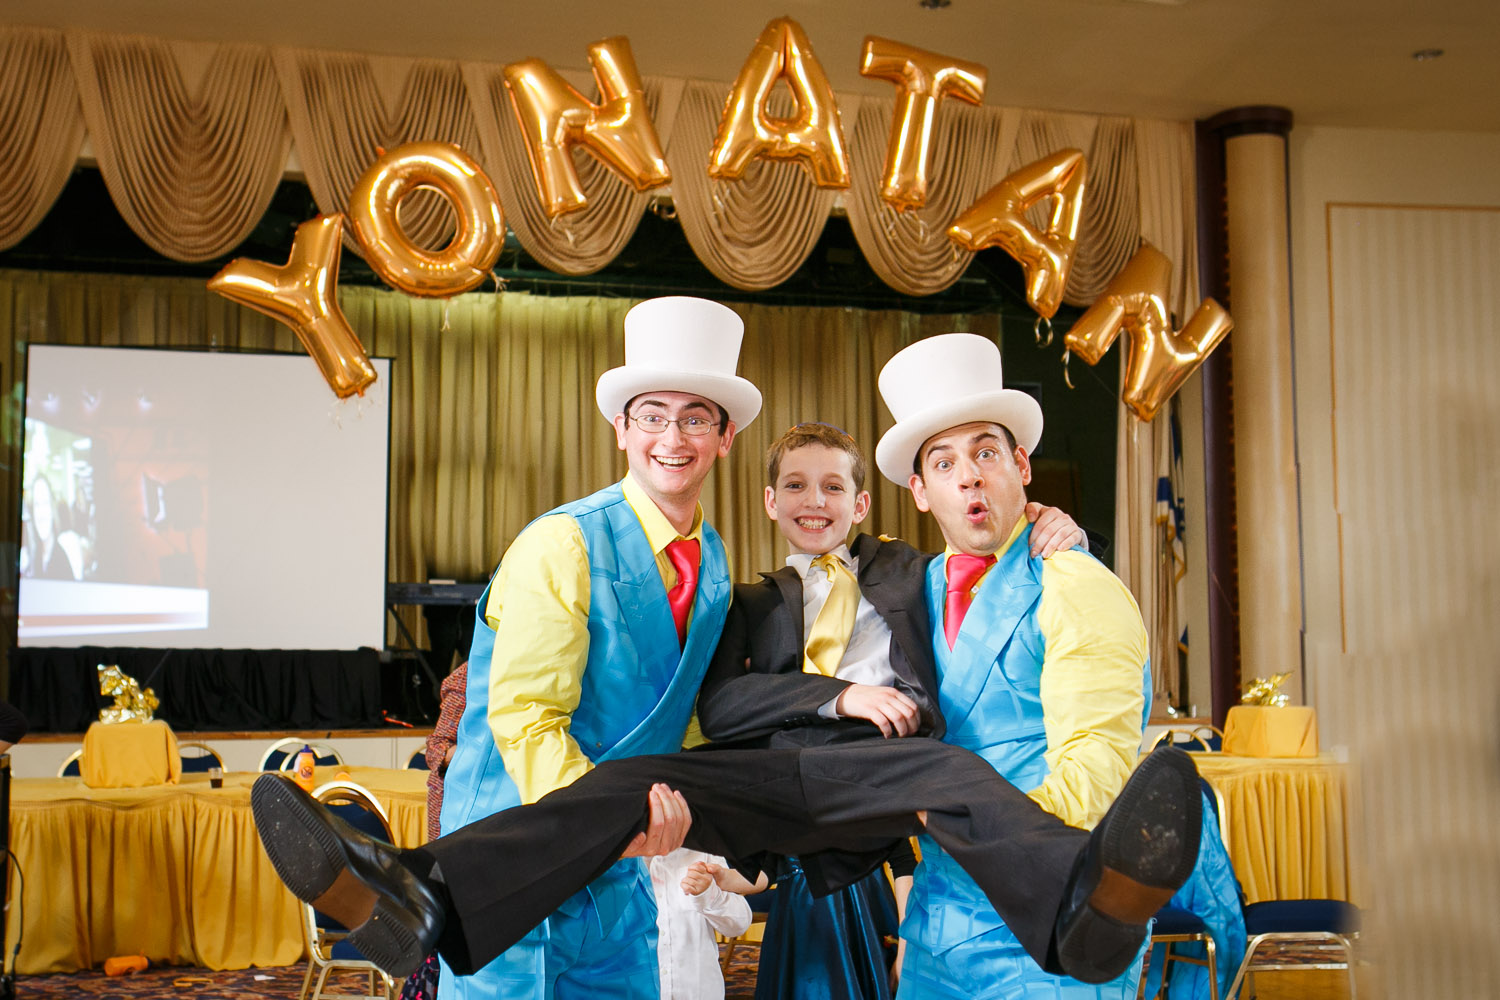 barmitzvah and entertainers